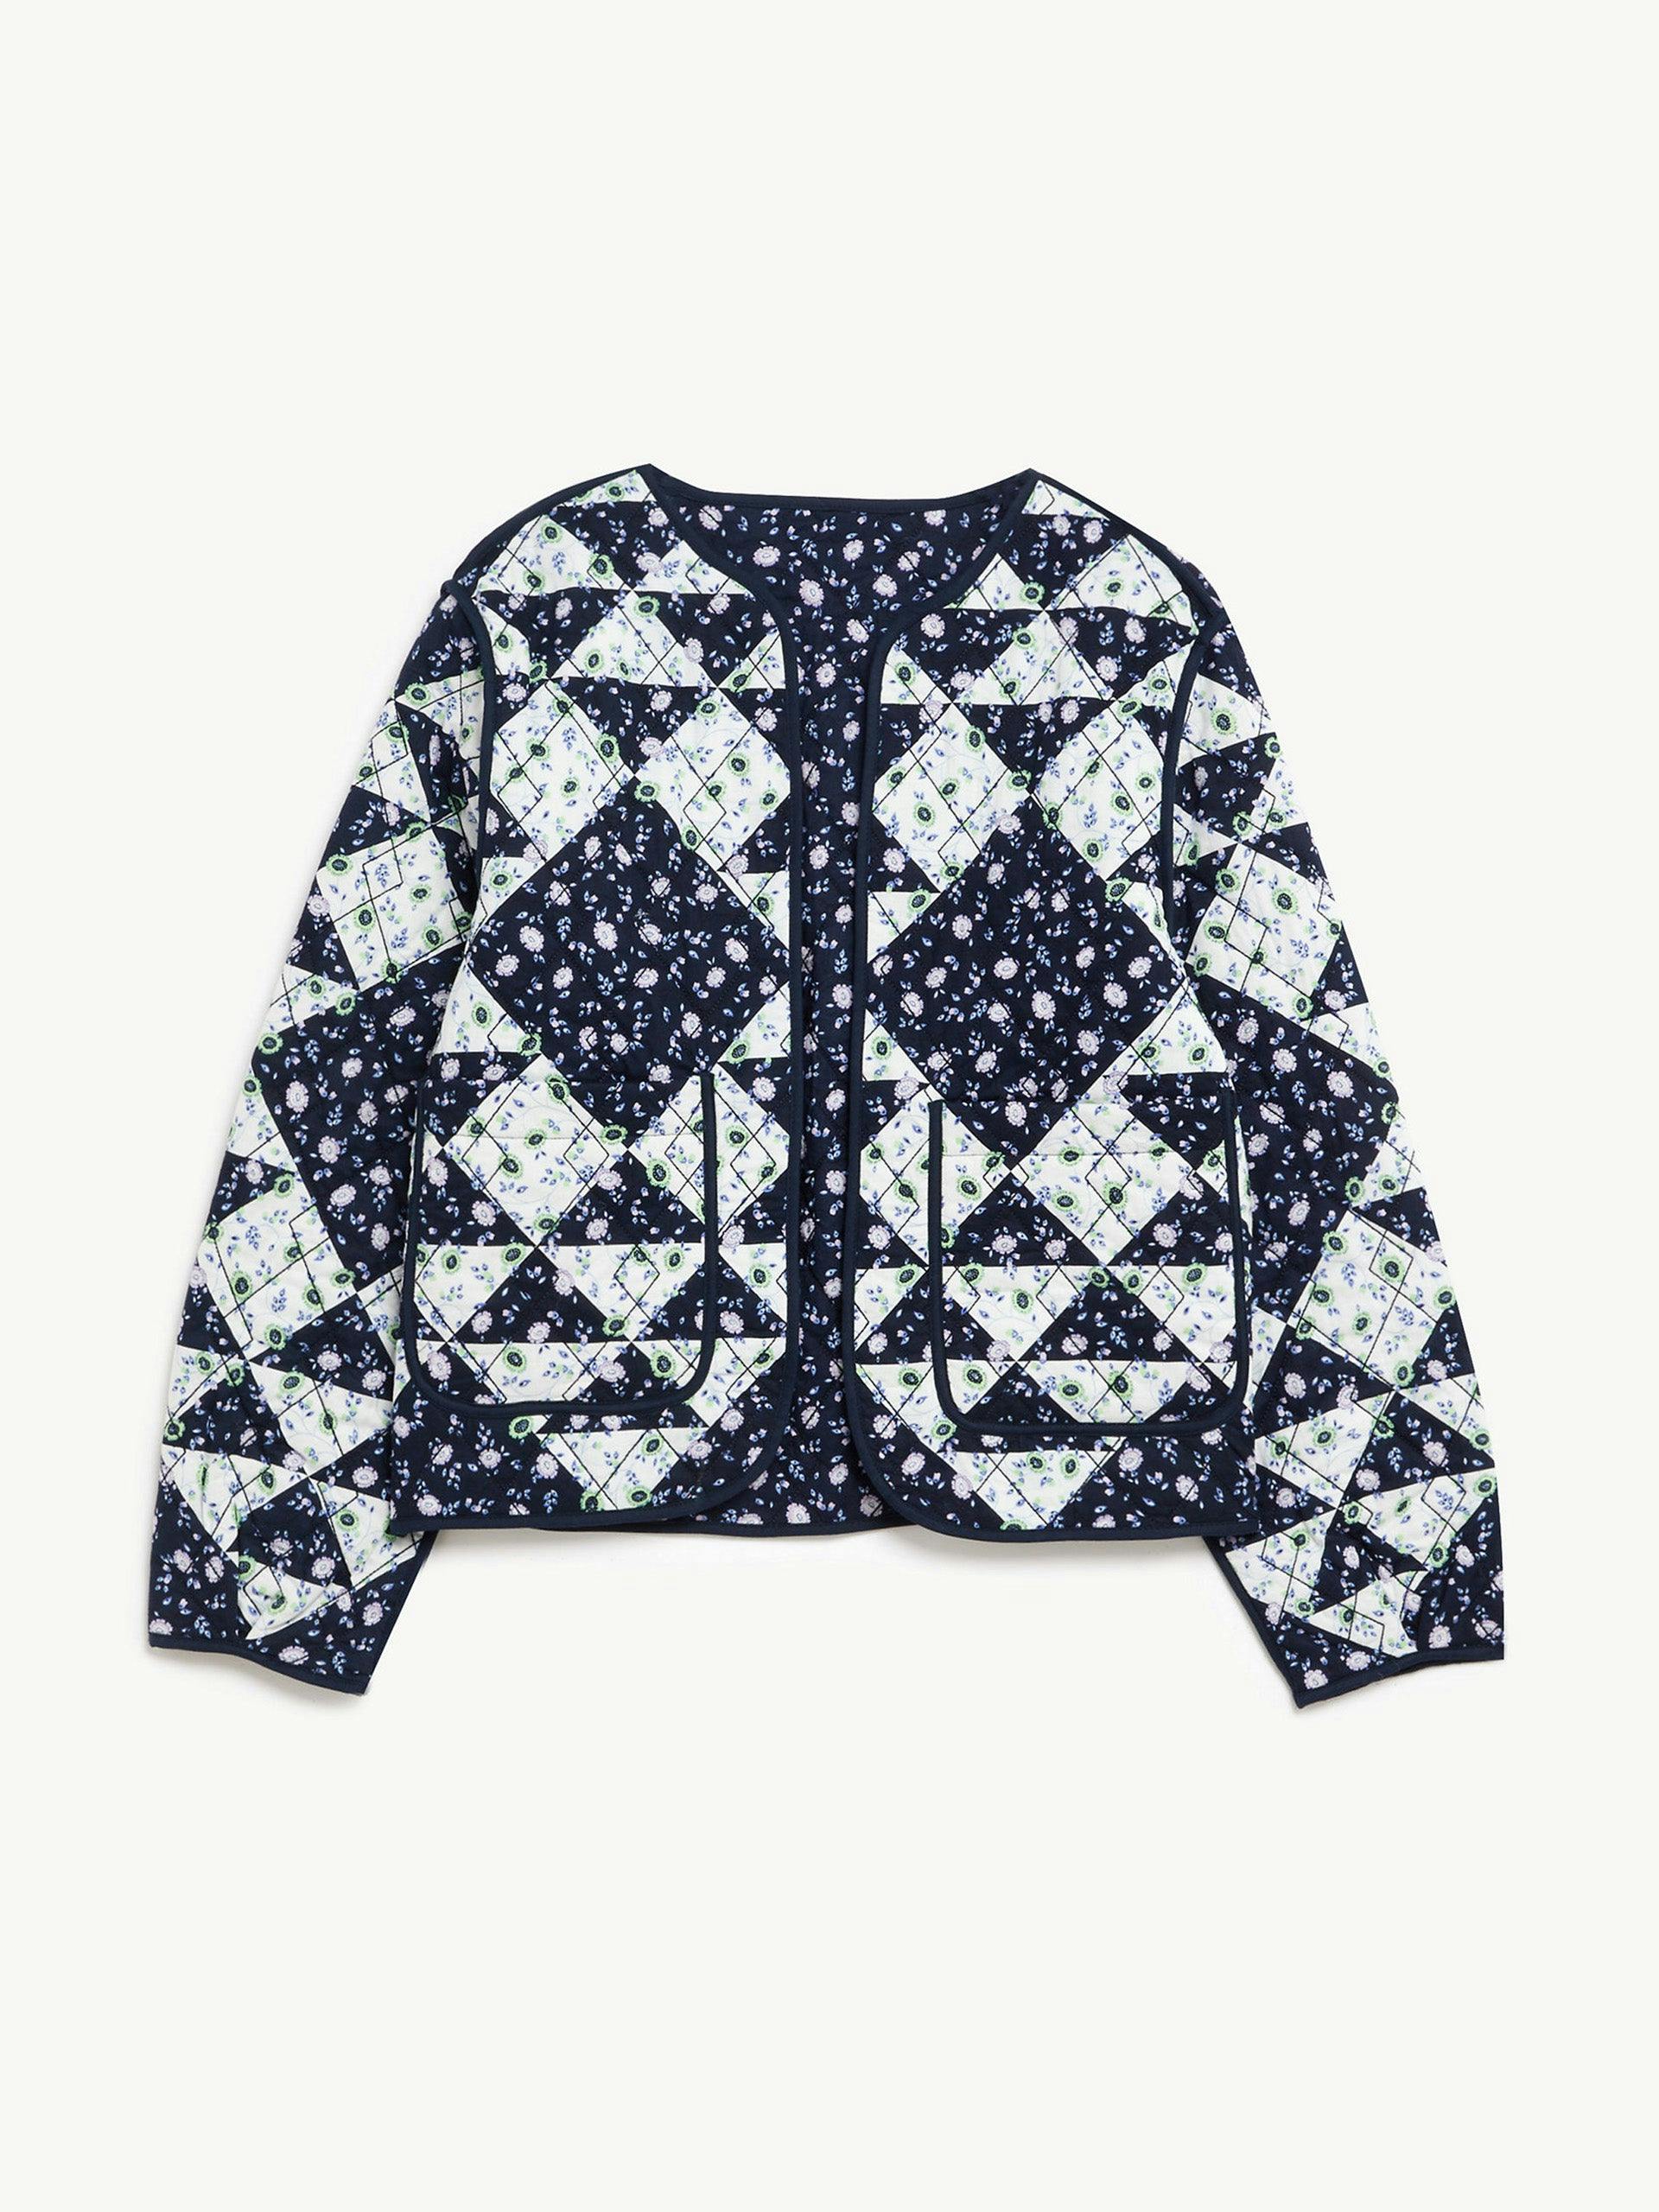 Navy and white reversible quilted jacket